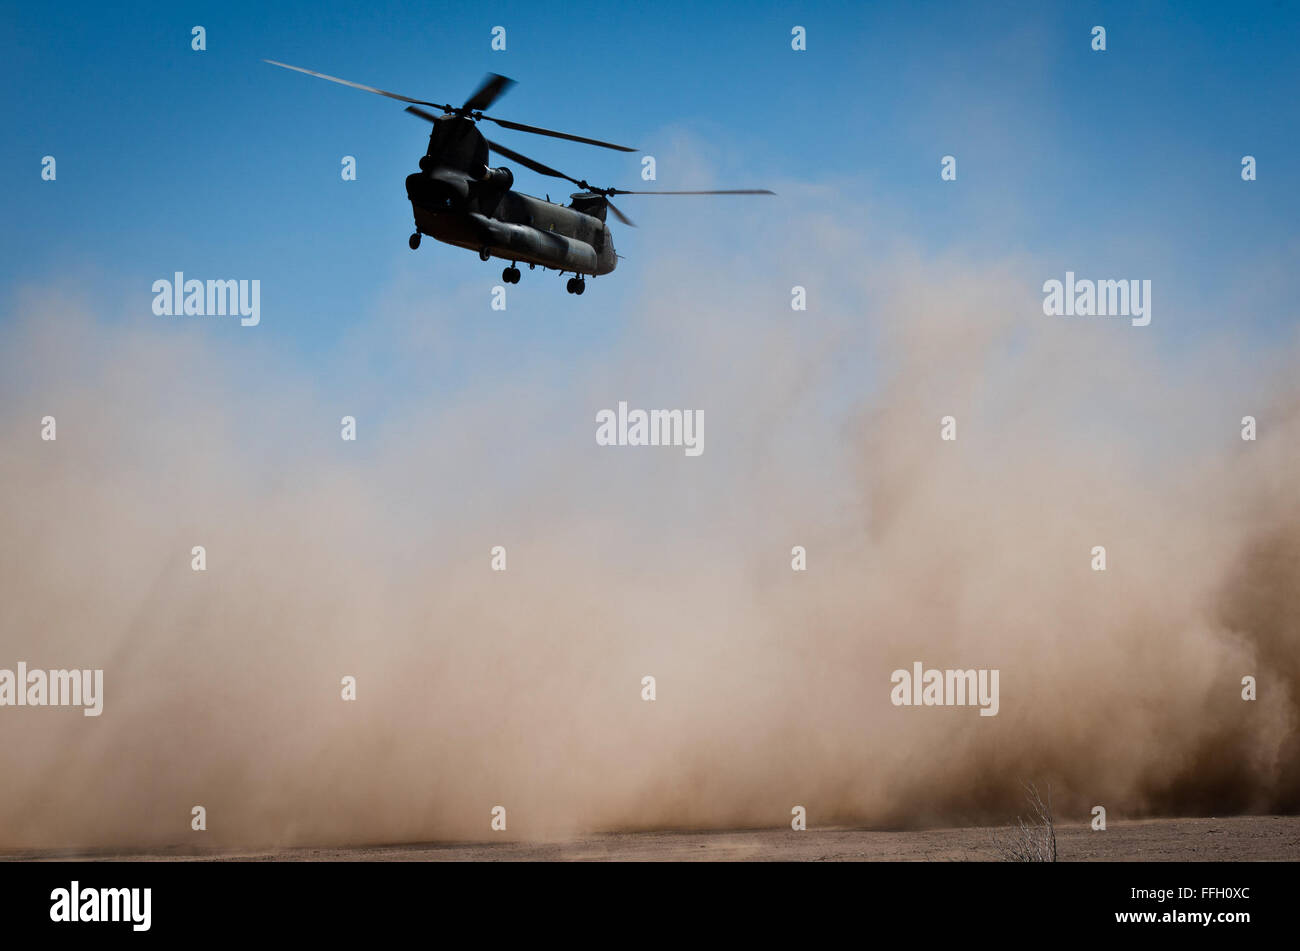 A CH-47 Chinook takes off in a cloud of dust at the Playas Training and Research Center in Playas, N.M. The helicopter, from the Army Reserve's Bravo Company, 7-158th Aviation Regiment, provided aerial transportation for U.S. and international military members during a mass casualty extraction exercise in Playas. Stock Photo